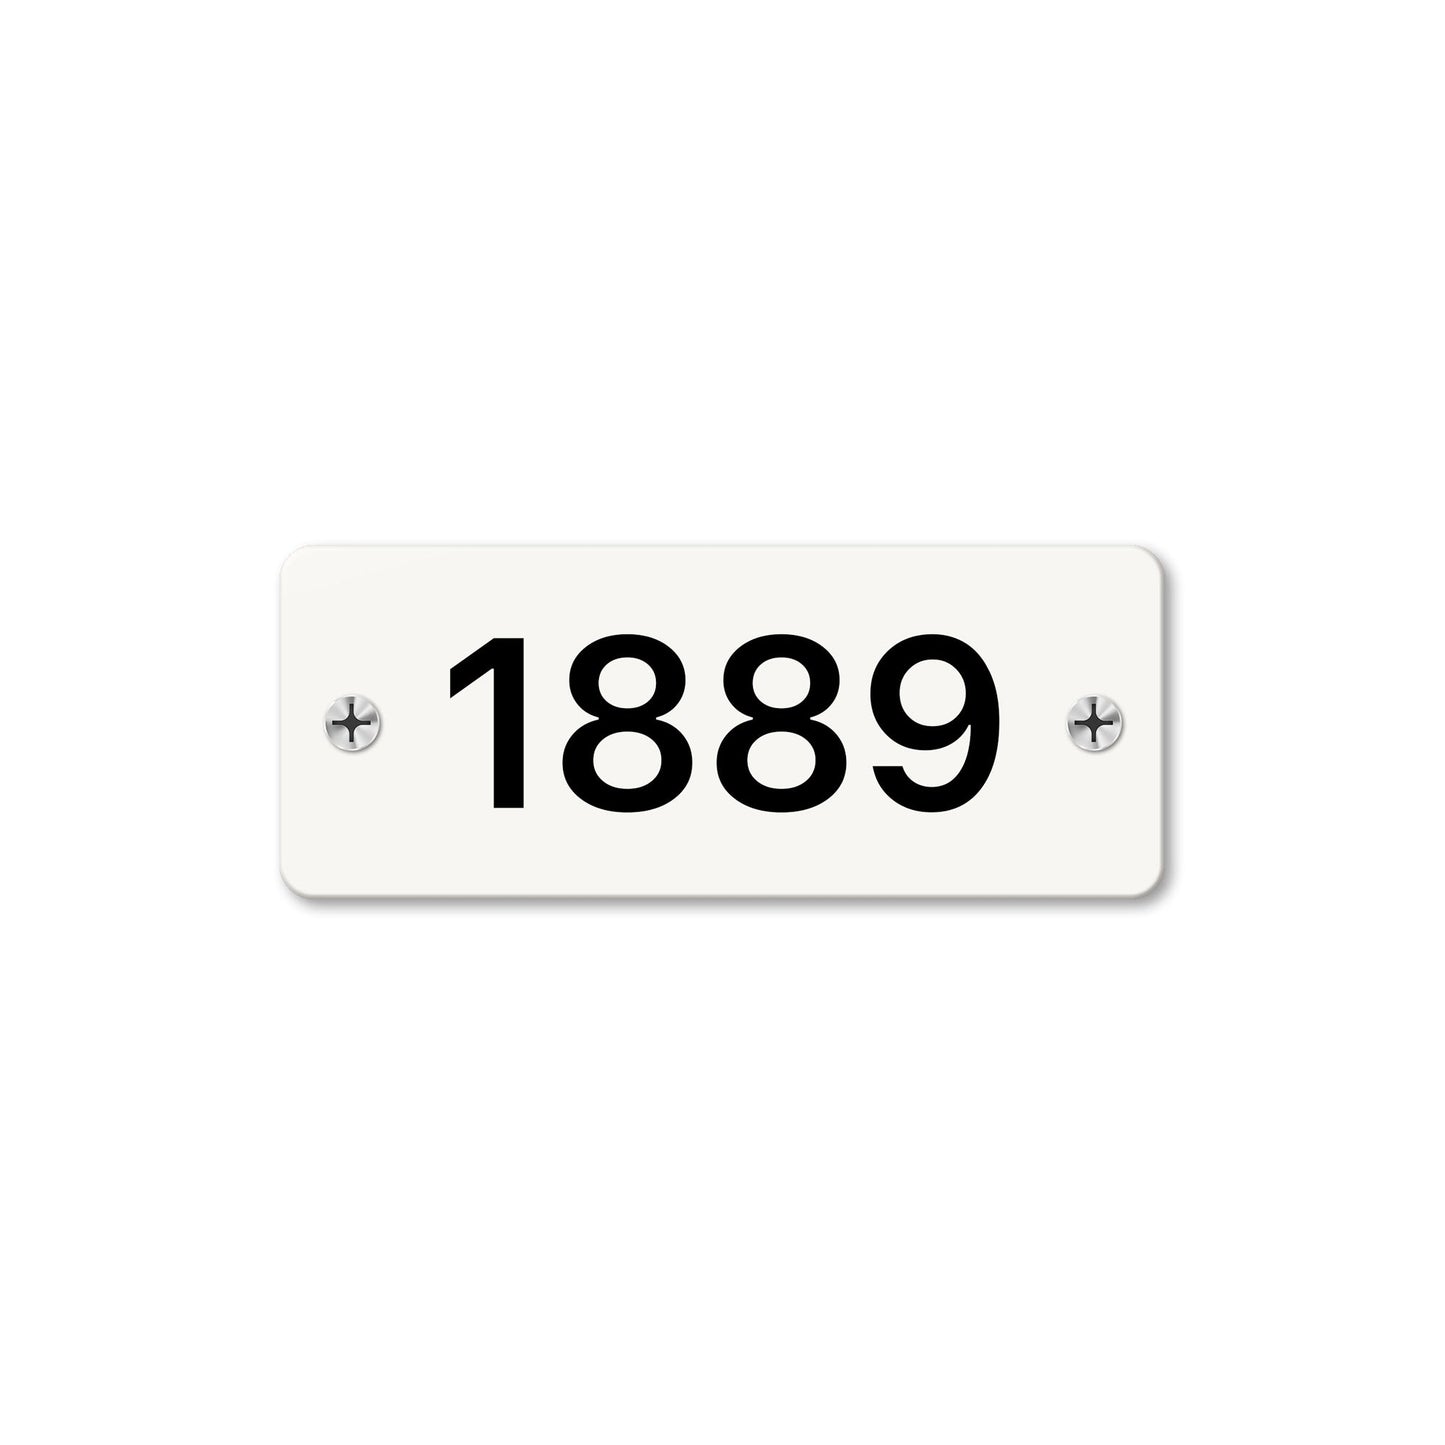 Numeral 1889